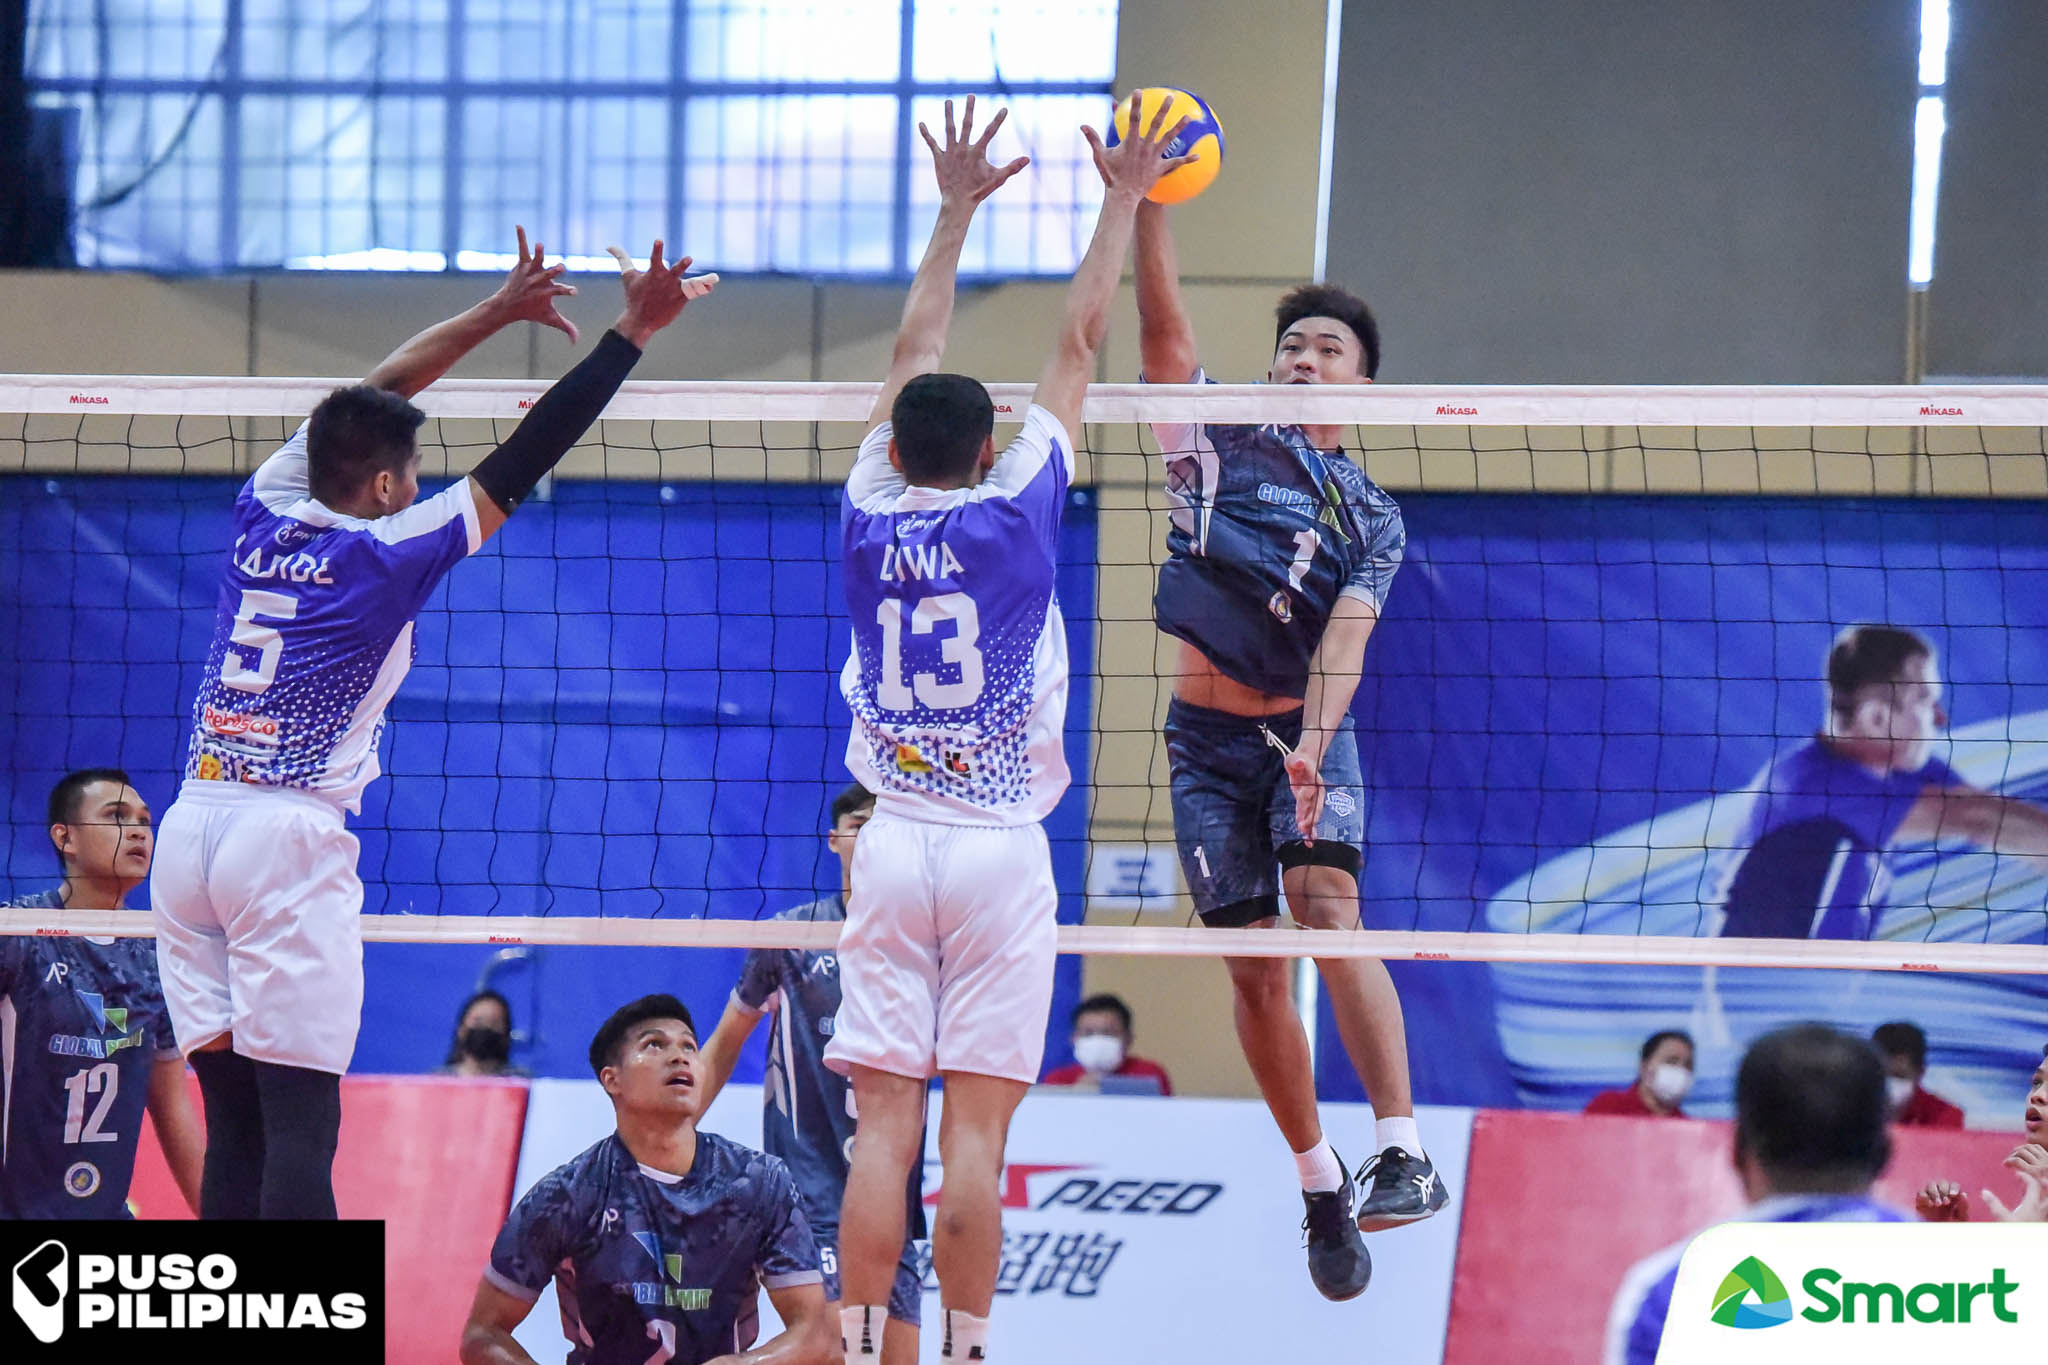 PNVF-Global-Remit-vs.-VNS-Disquitado-5672 VNS sweeps Global Remit, secures PNVFCL bronze News Volleyball  - philippine sports news